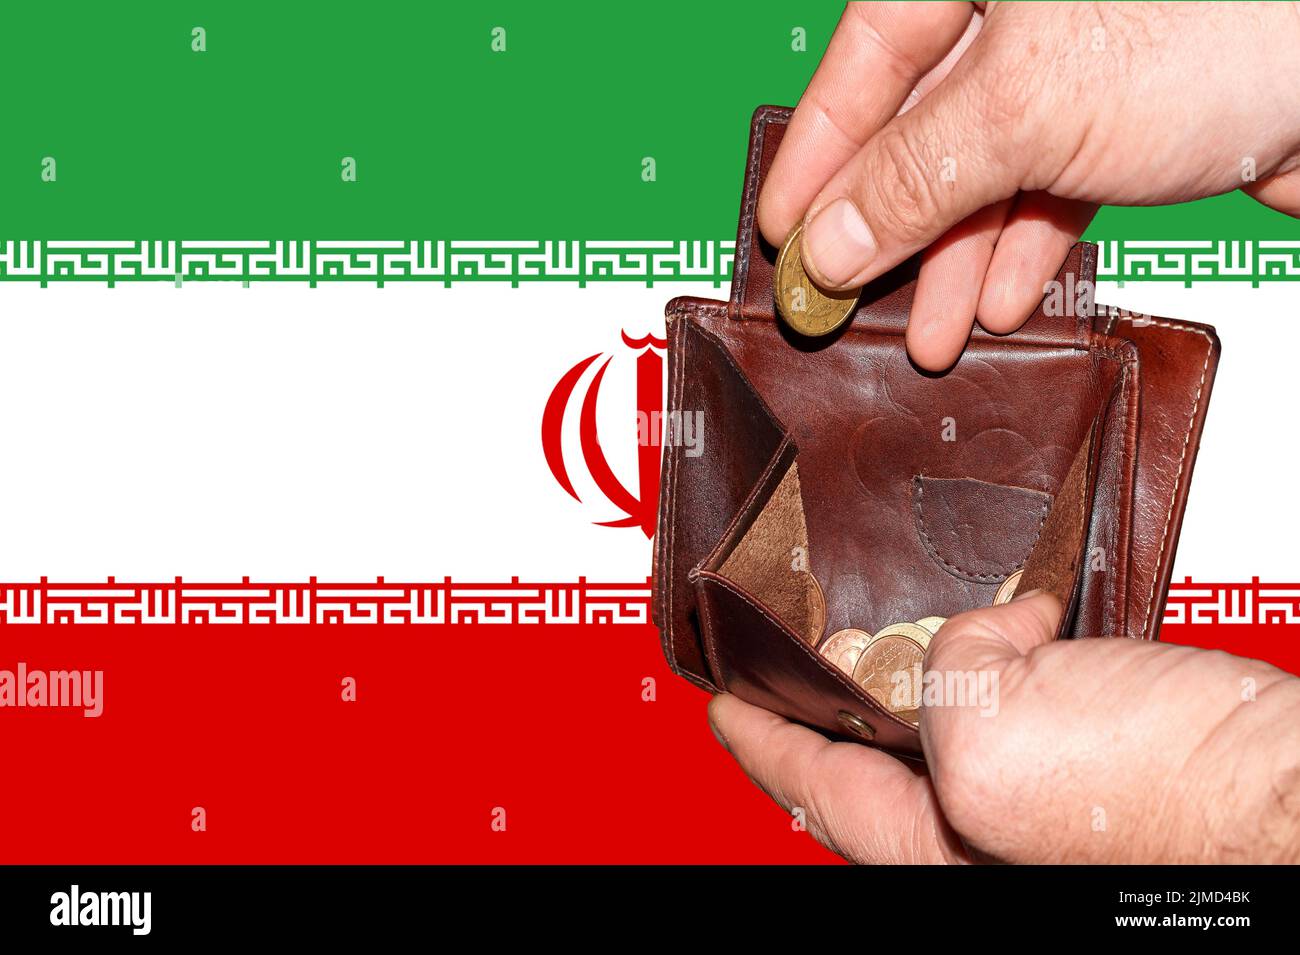 Empty wallet shows the global financial economic crisis triggered by the corona virus in Iran Stock Photo